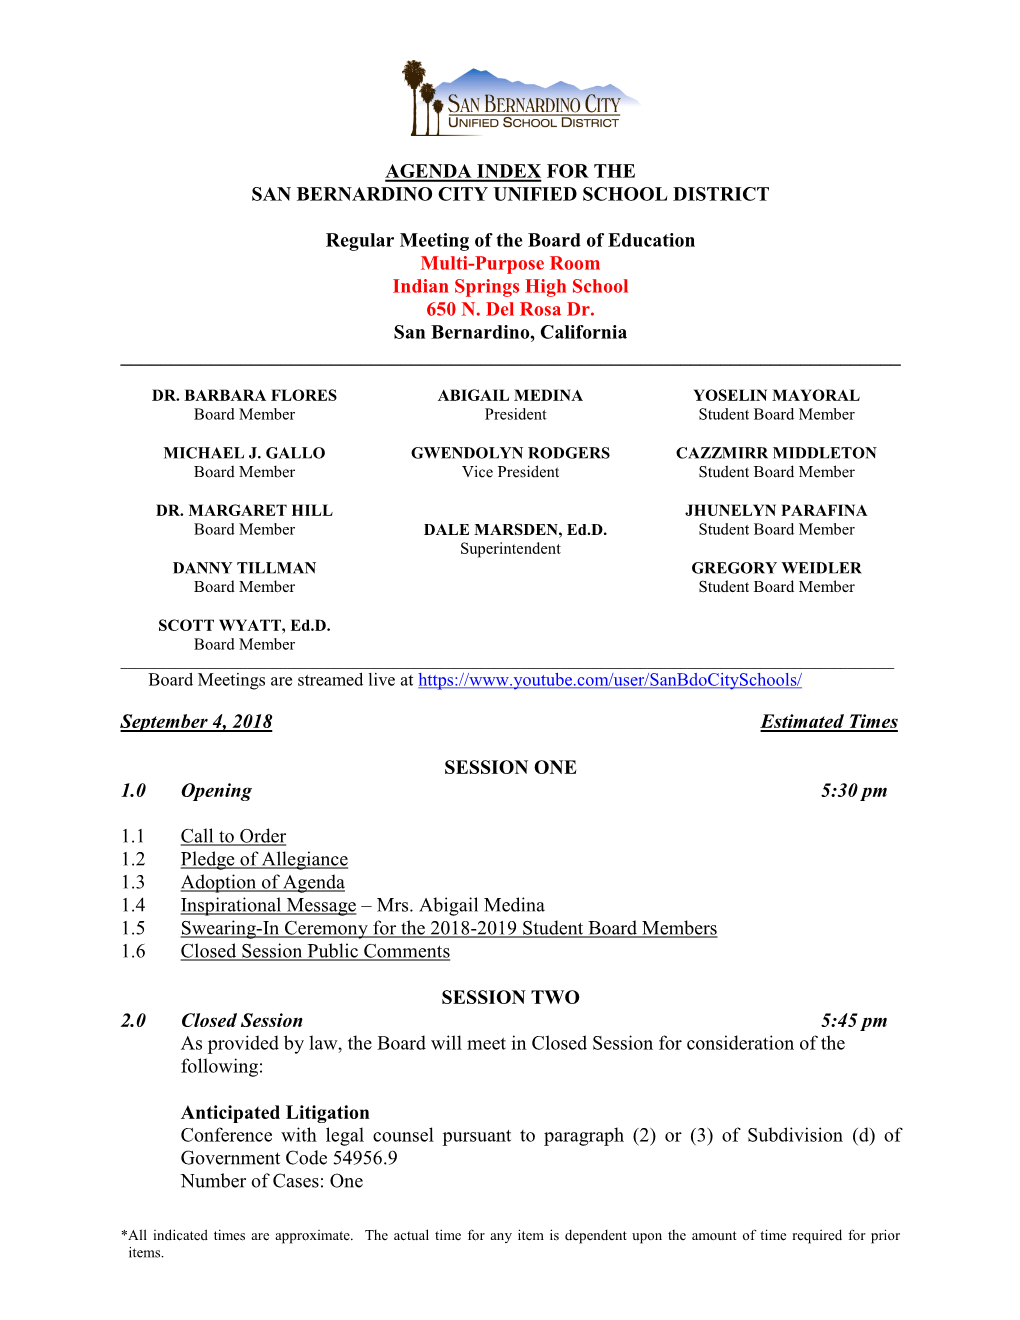 AGENDA INDEX for the SAN BERNARDINO CITY UNIFIED SCHOOL DISTRICT Regular Meeting of the Board of Education